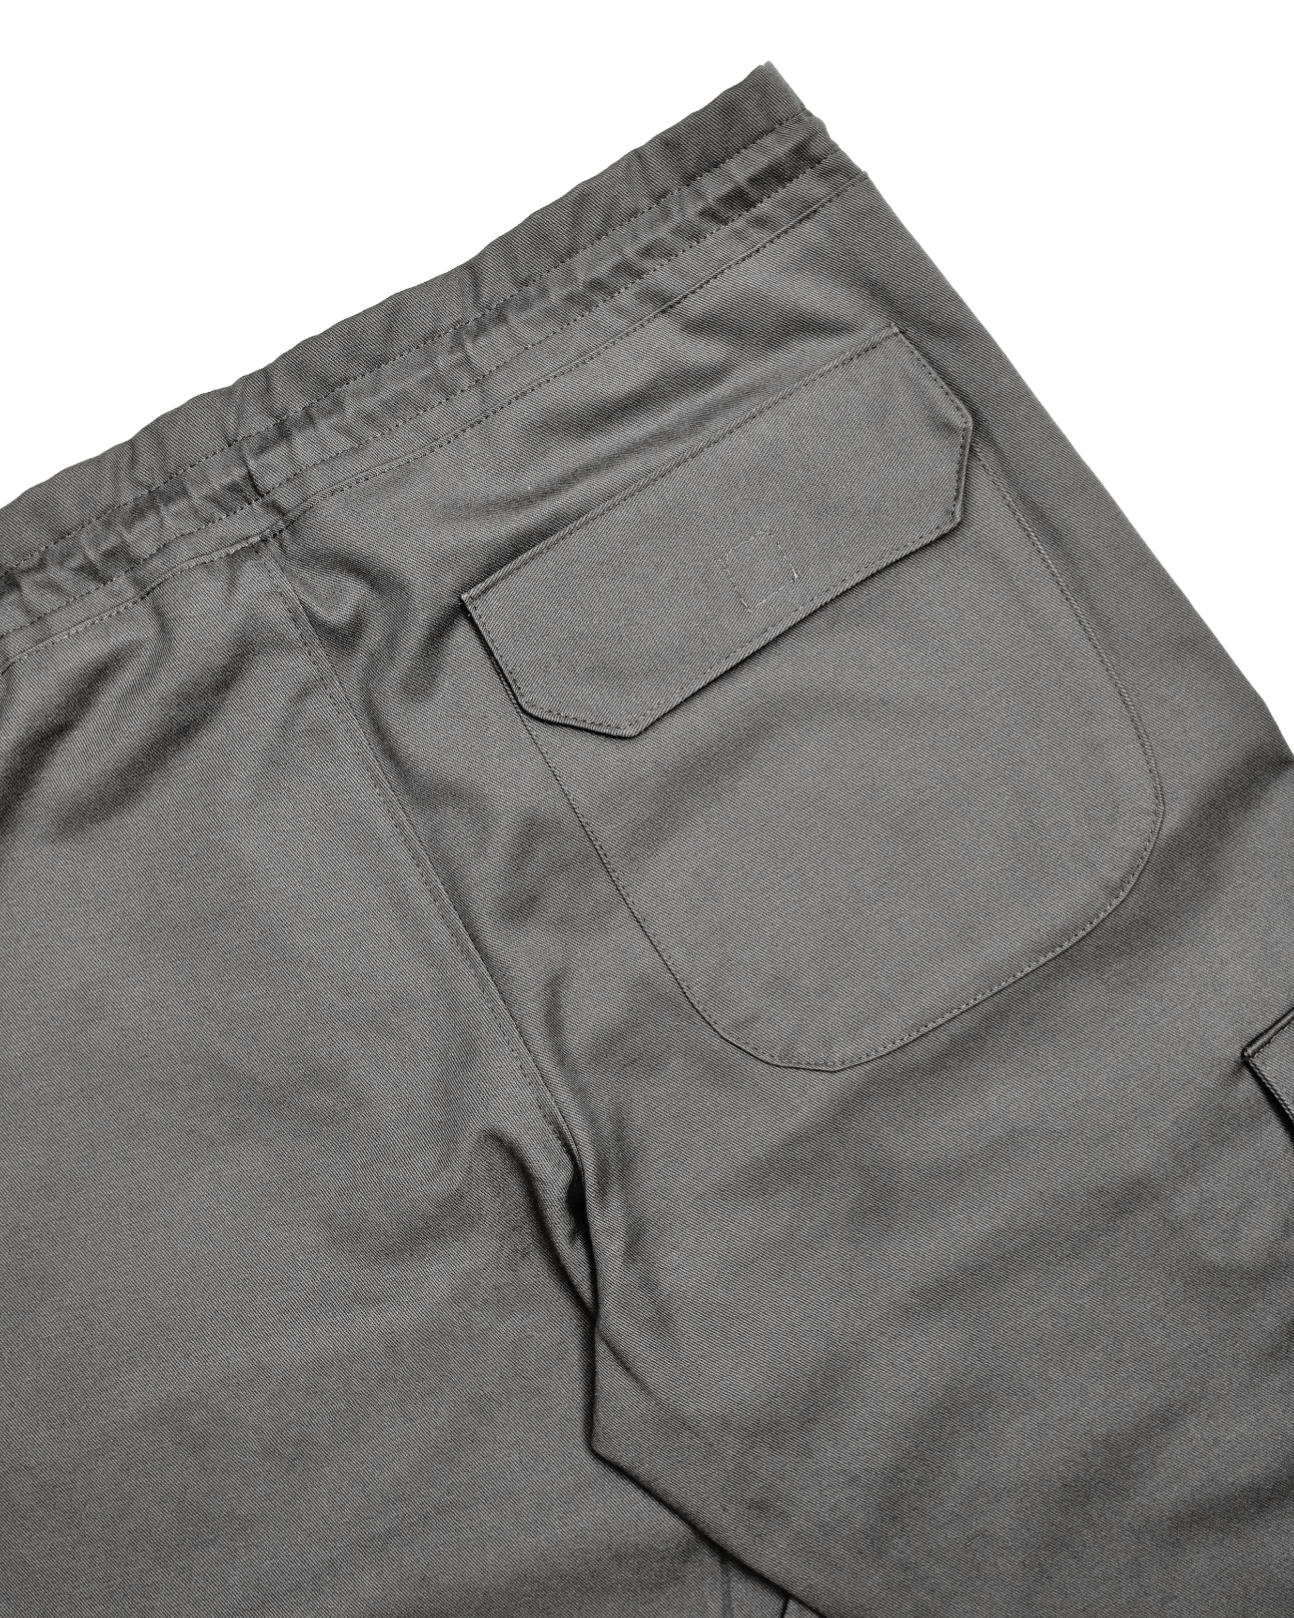 The Simple Cargo Pant